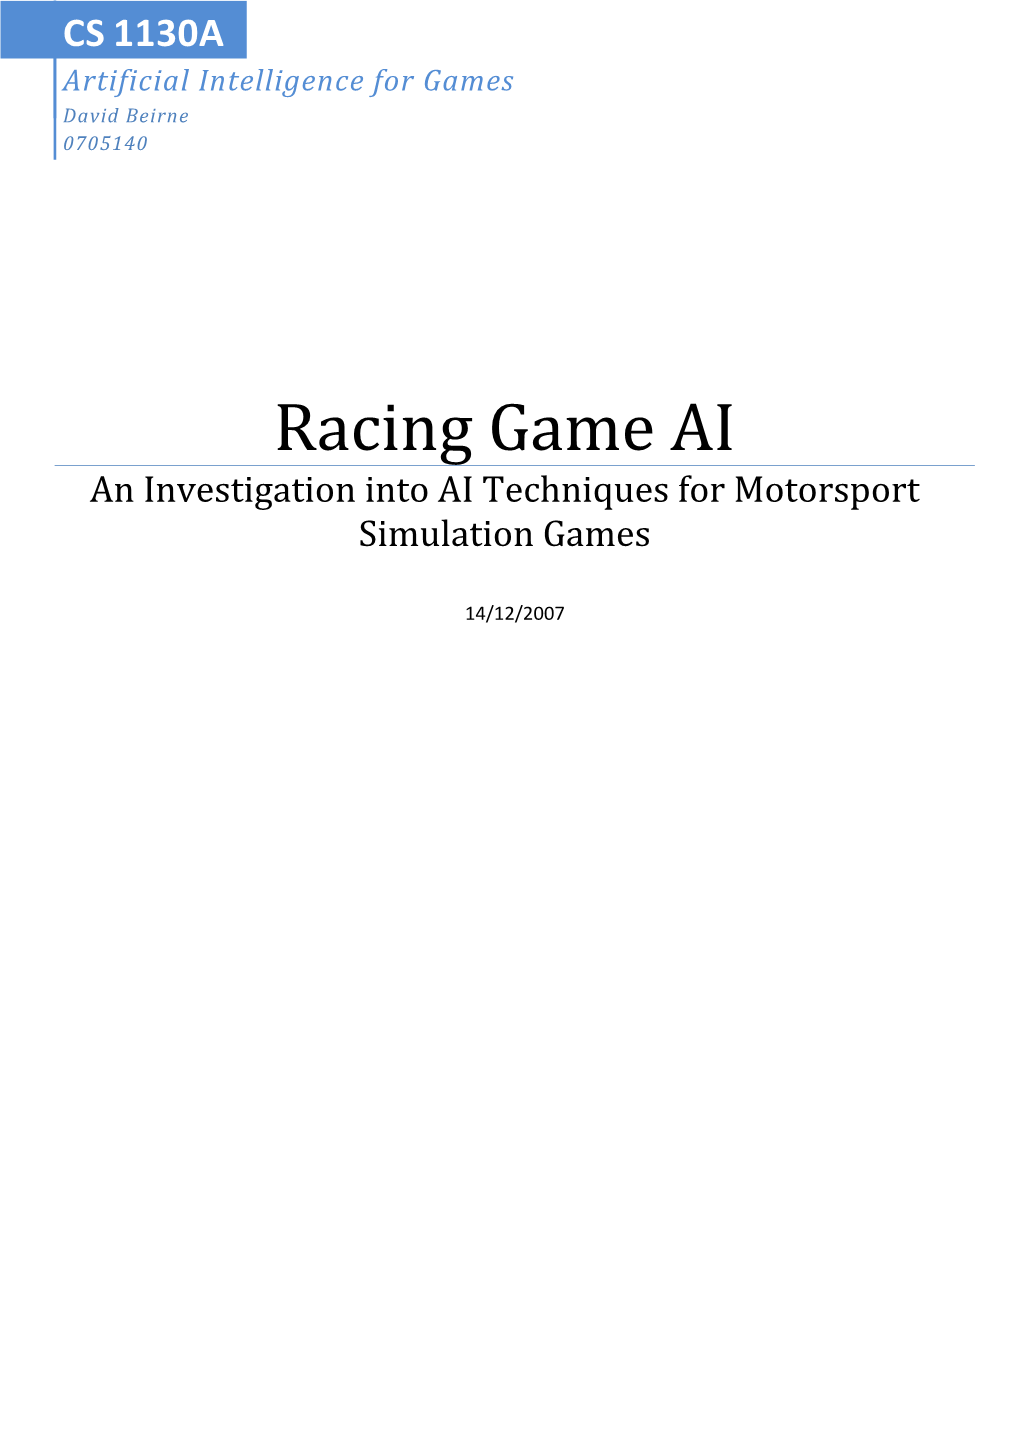 Racing Game AI an Investigation Into AI Techniques for Motorsport Simulation Games